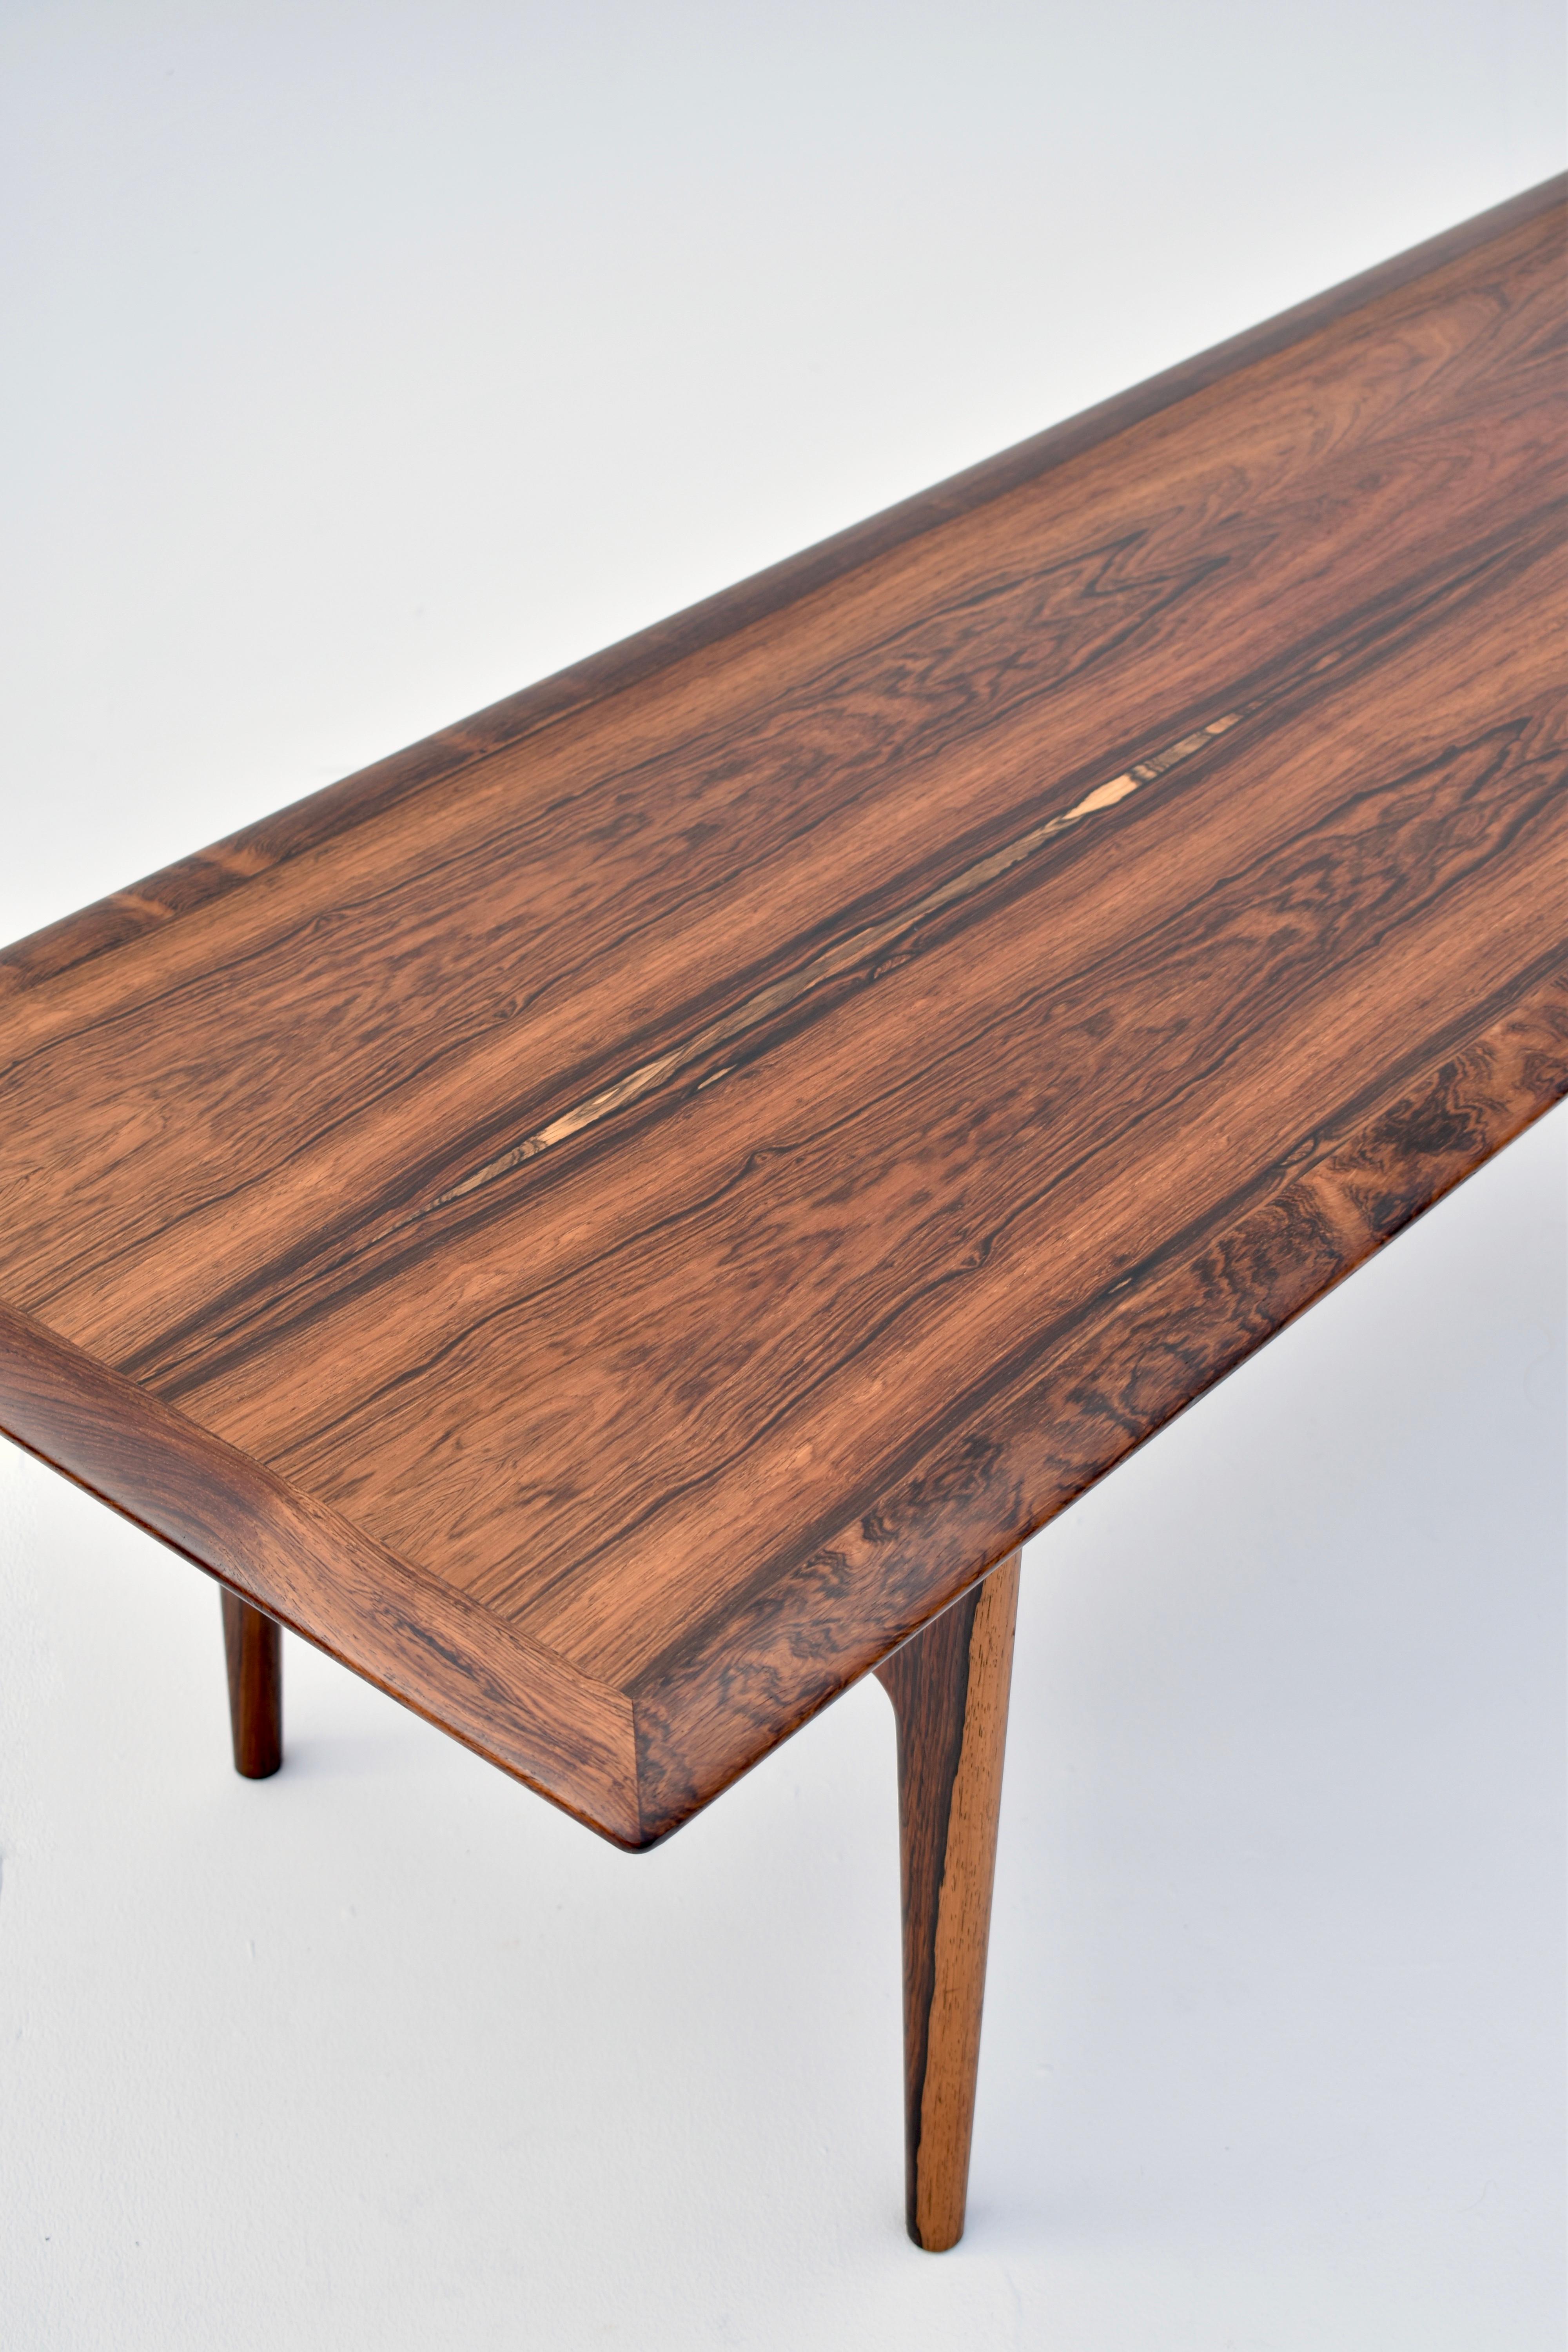 Mid-20th Century 1960's Danish Rosewood Coffee Table for C.F Christensen